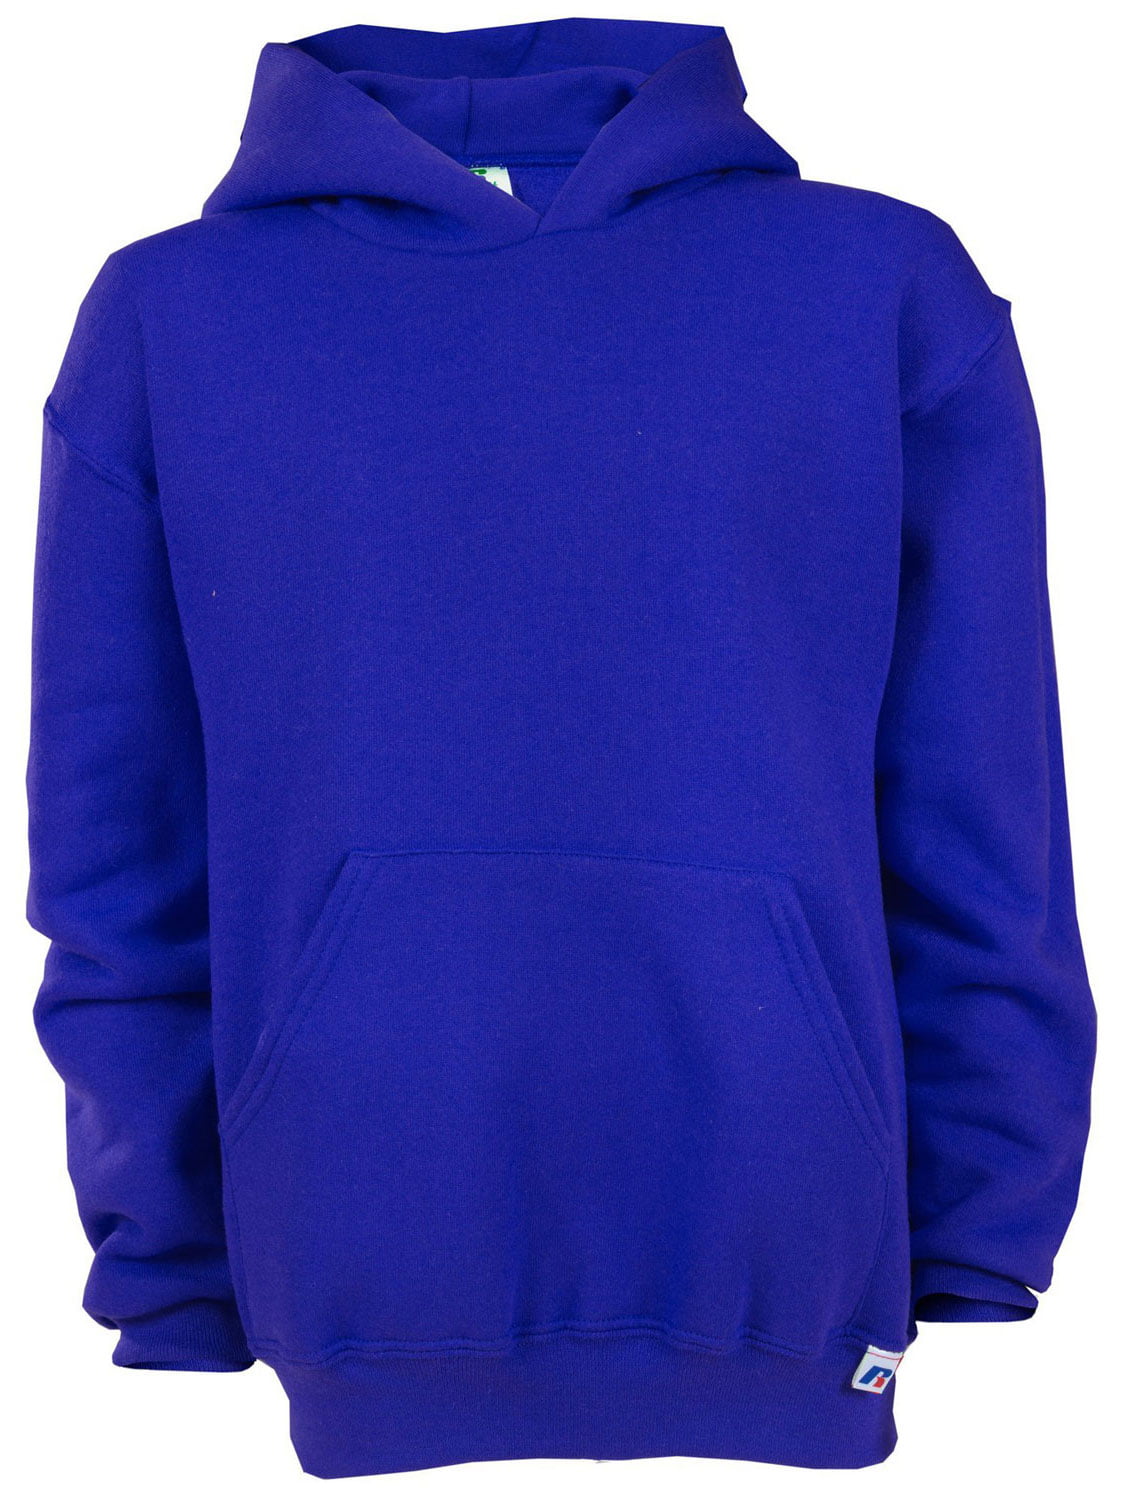 Russell Athletic boys Hooded 